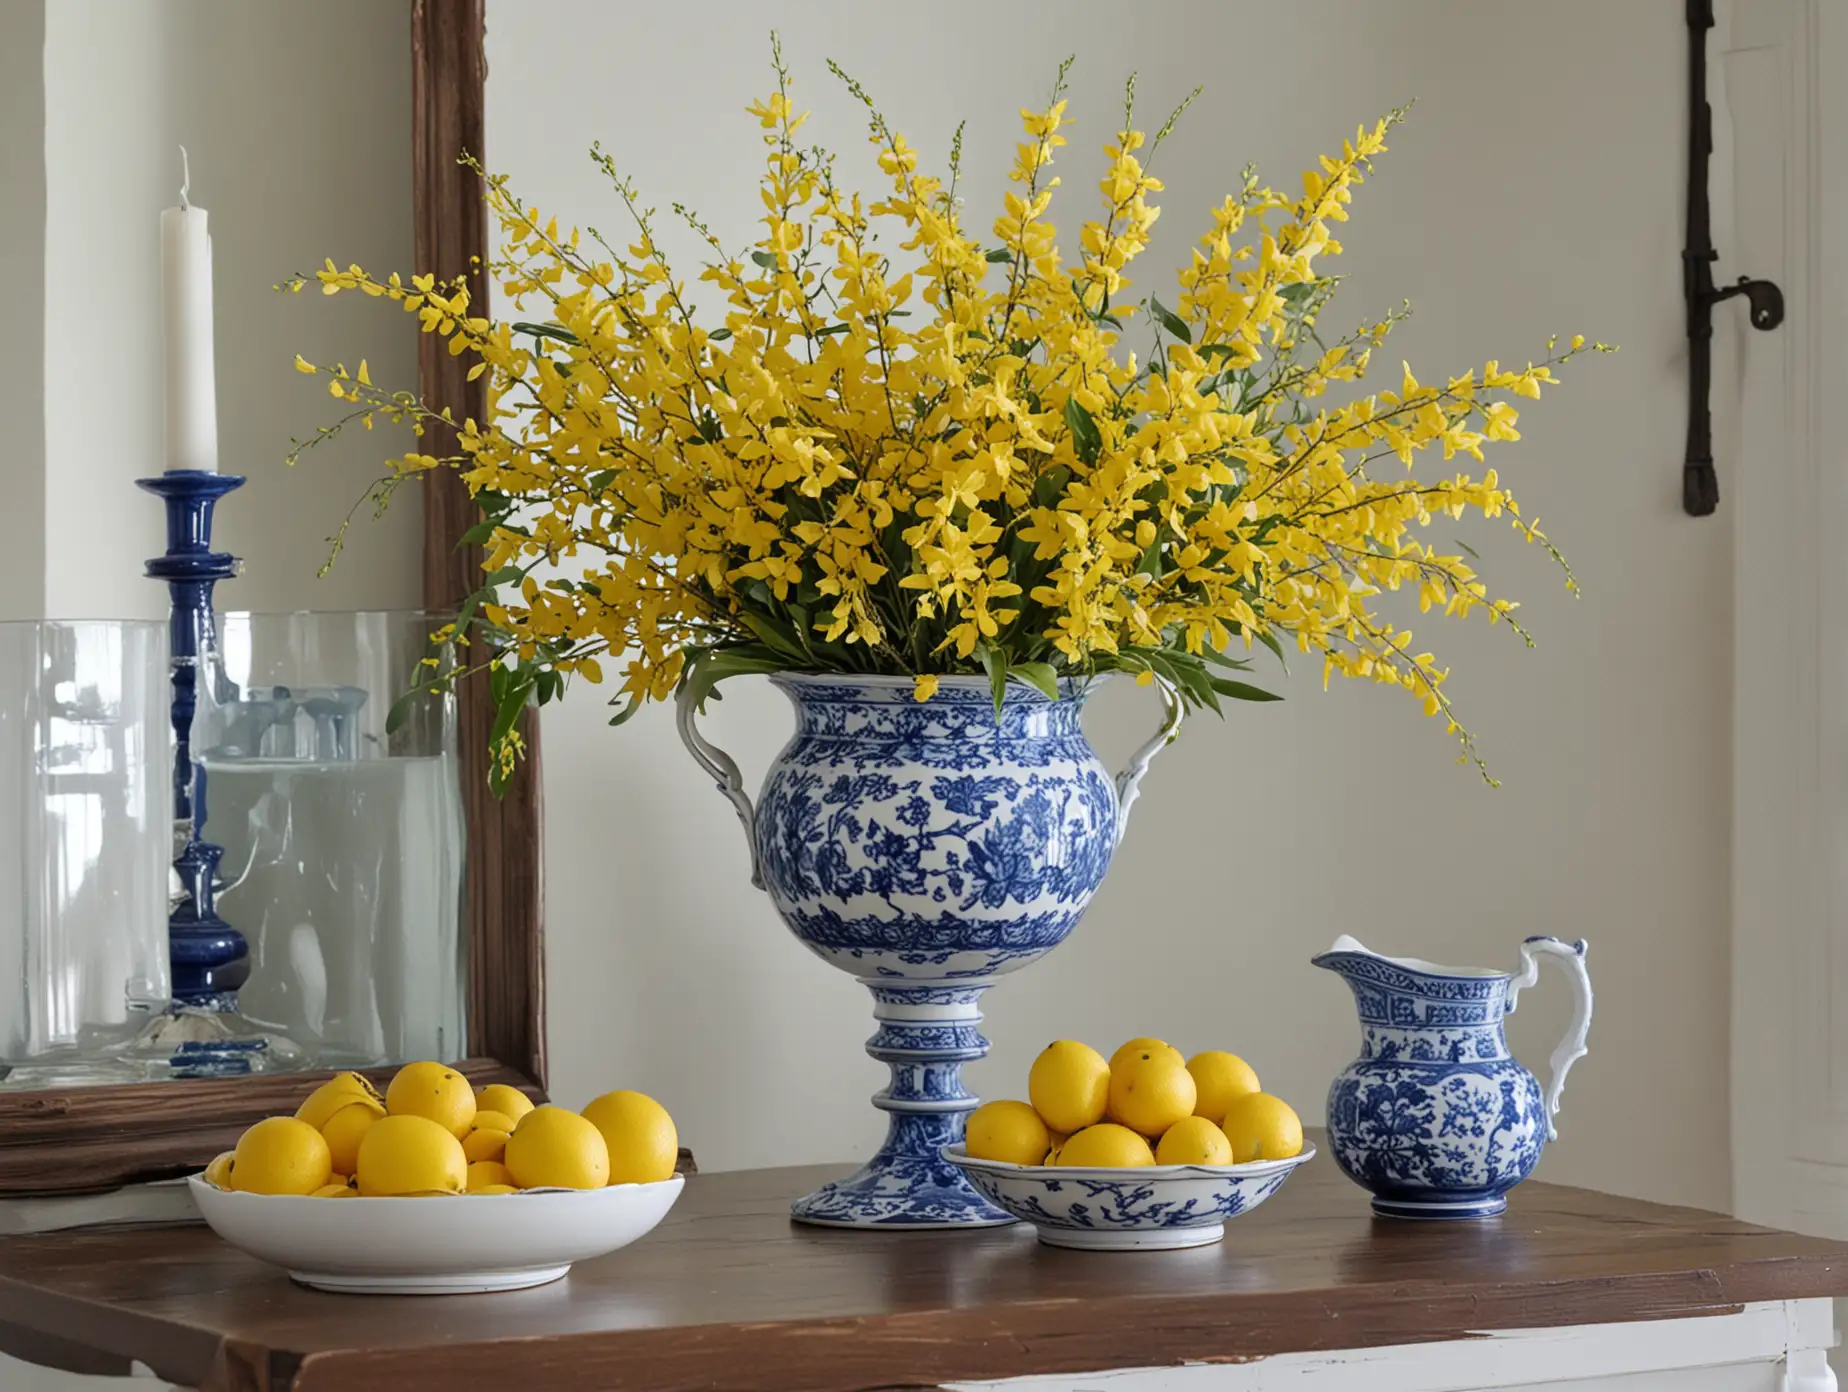 Blue and White Pedestal Compote with Forsythia Bouquet